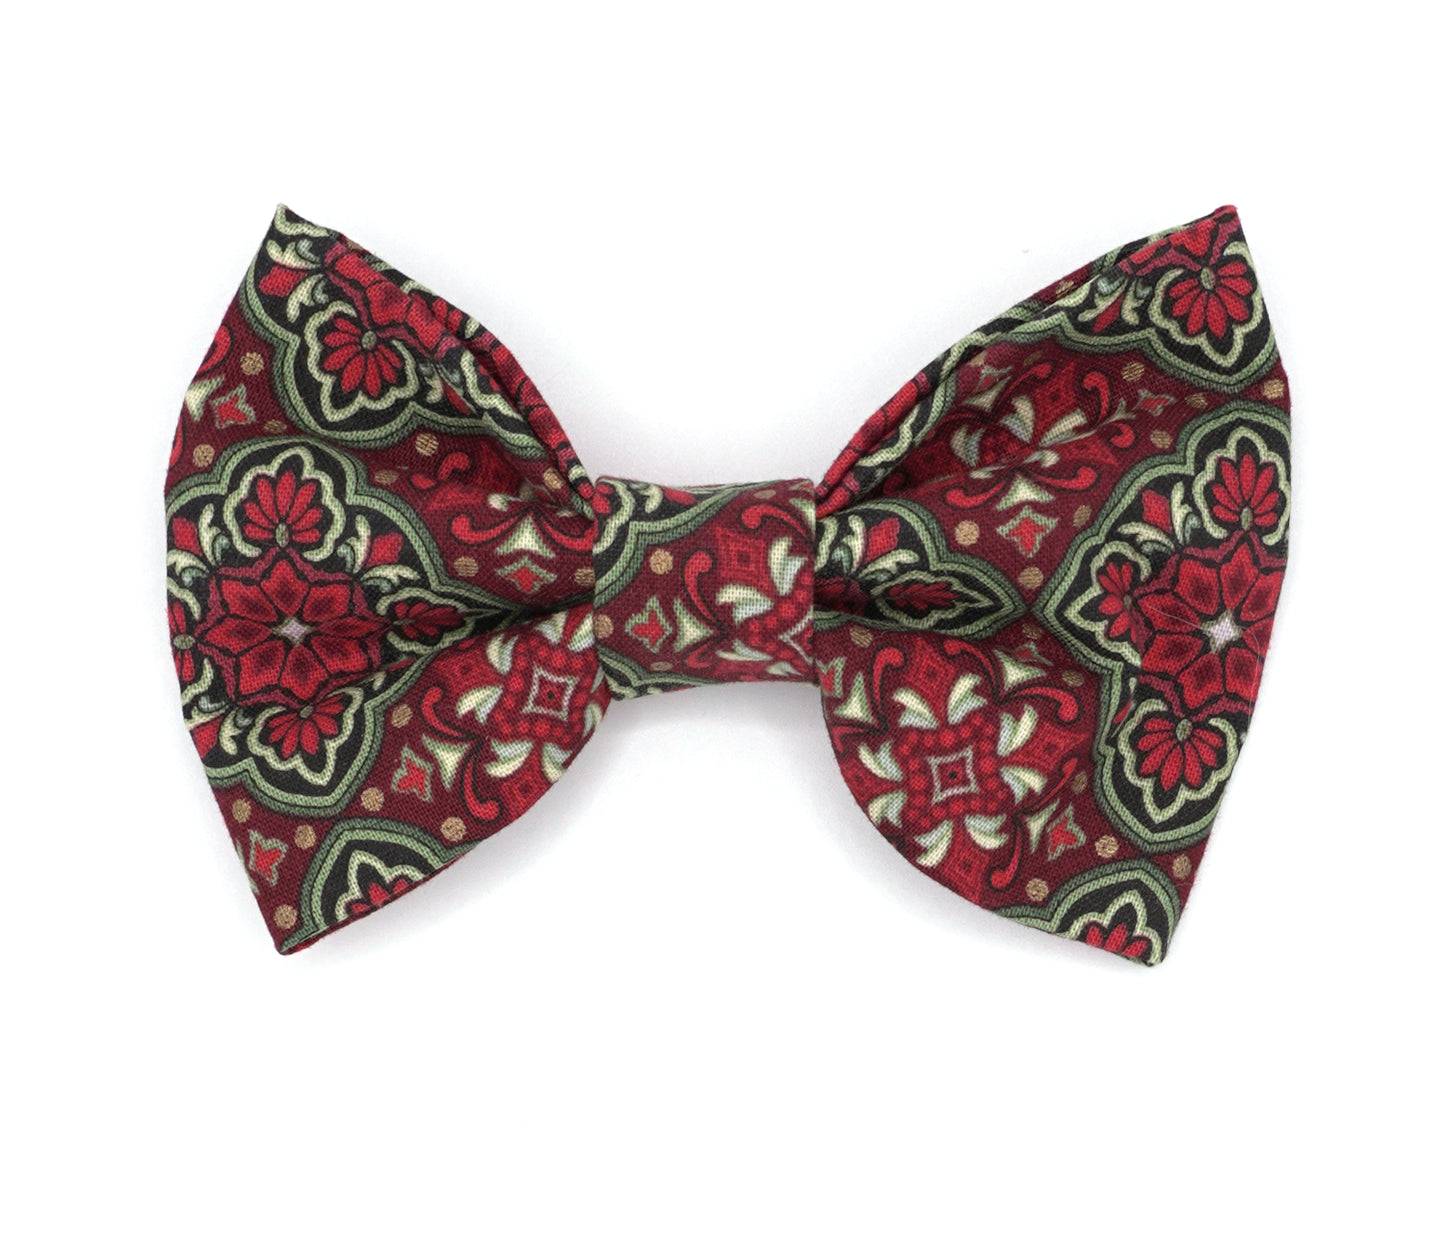 Handmade cotton bow tie for dogs (or other pets). Elastic straps on back with snaps make it easy to add to collar, harness, or leash. Red, green, gold and black ornamental design.